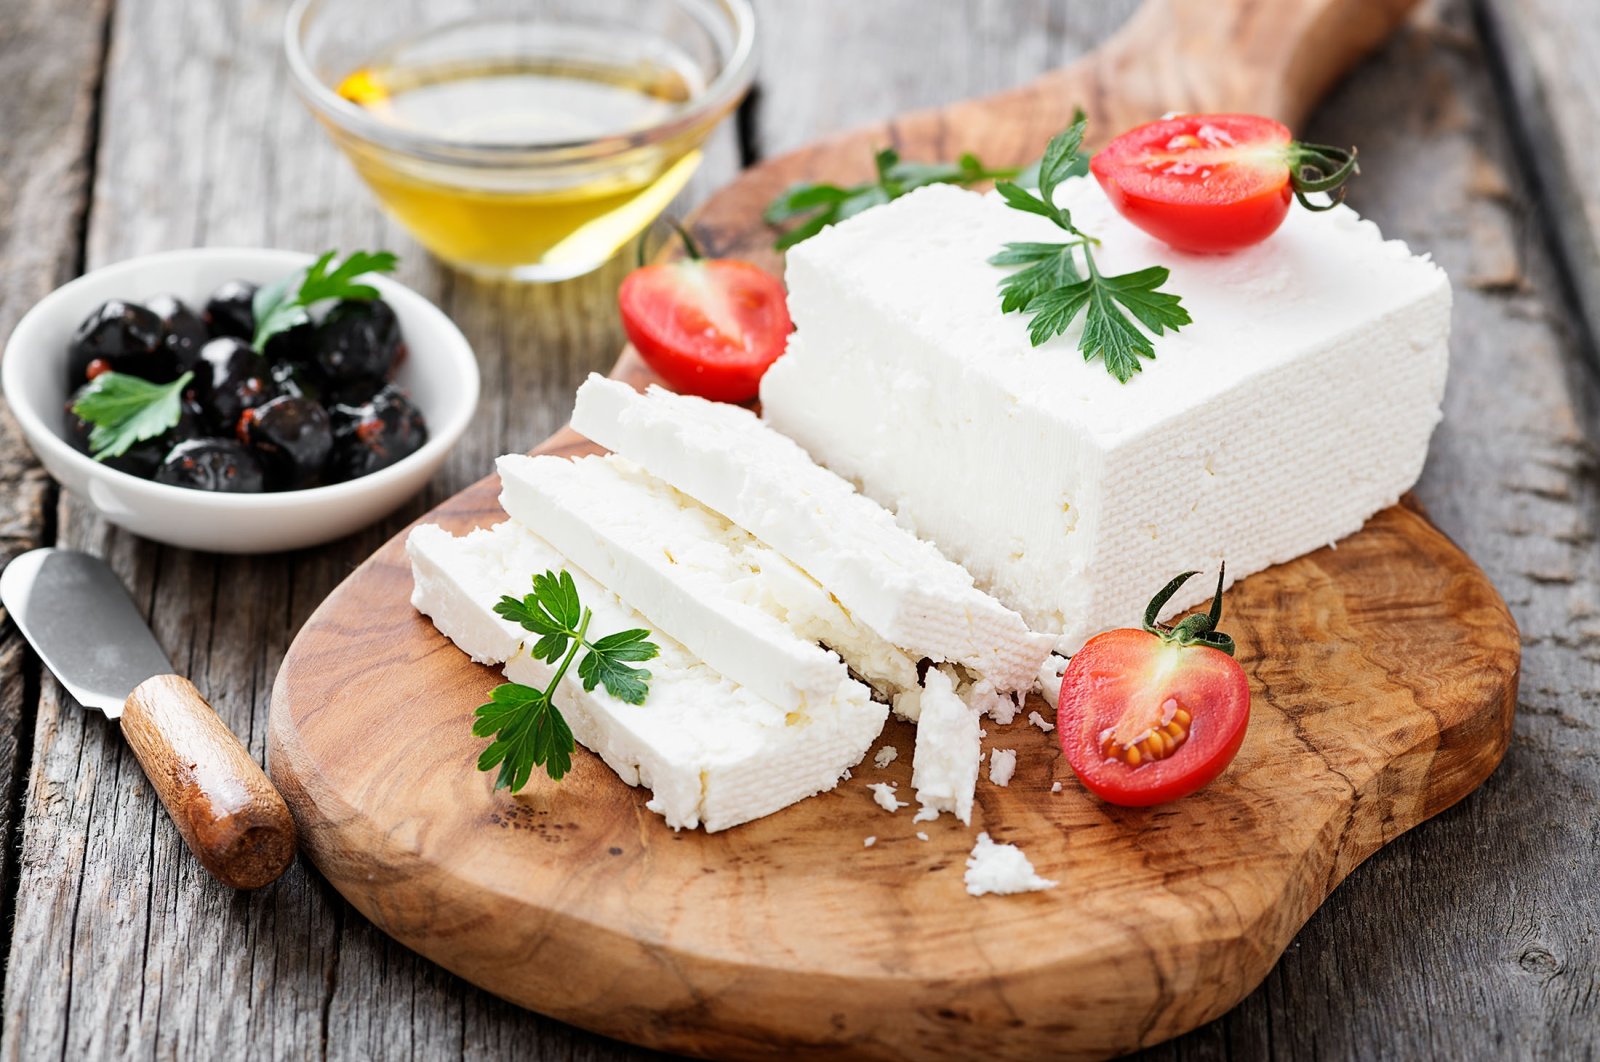 Sliced feta cheese with herbs and olive oil. (Shutterstock Photo)